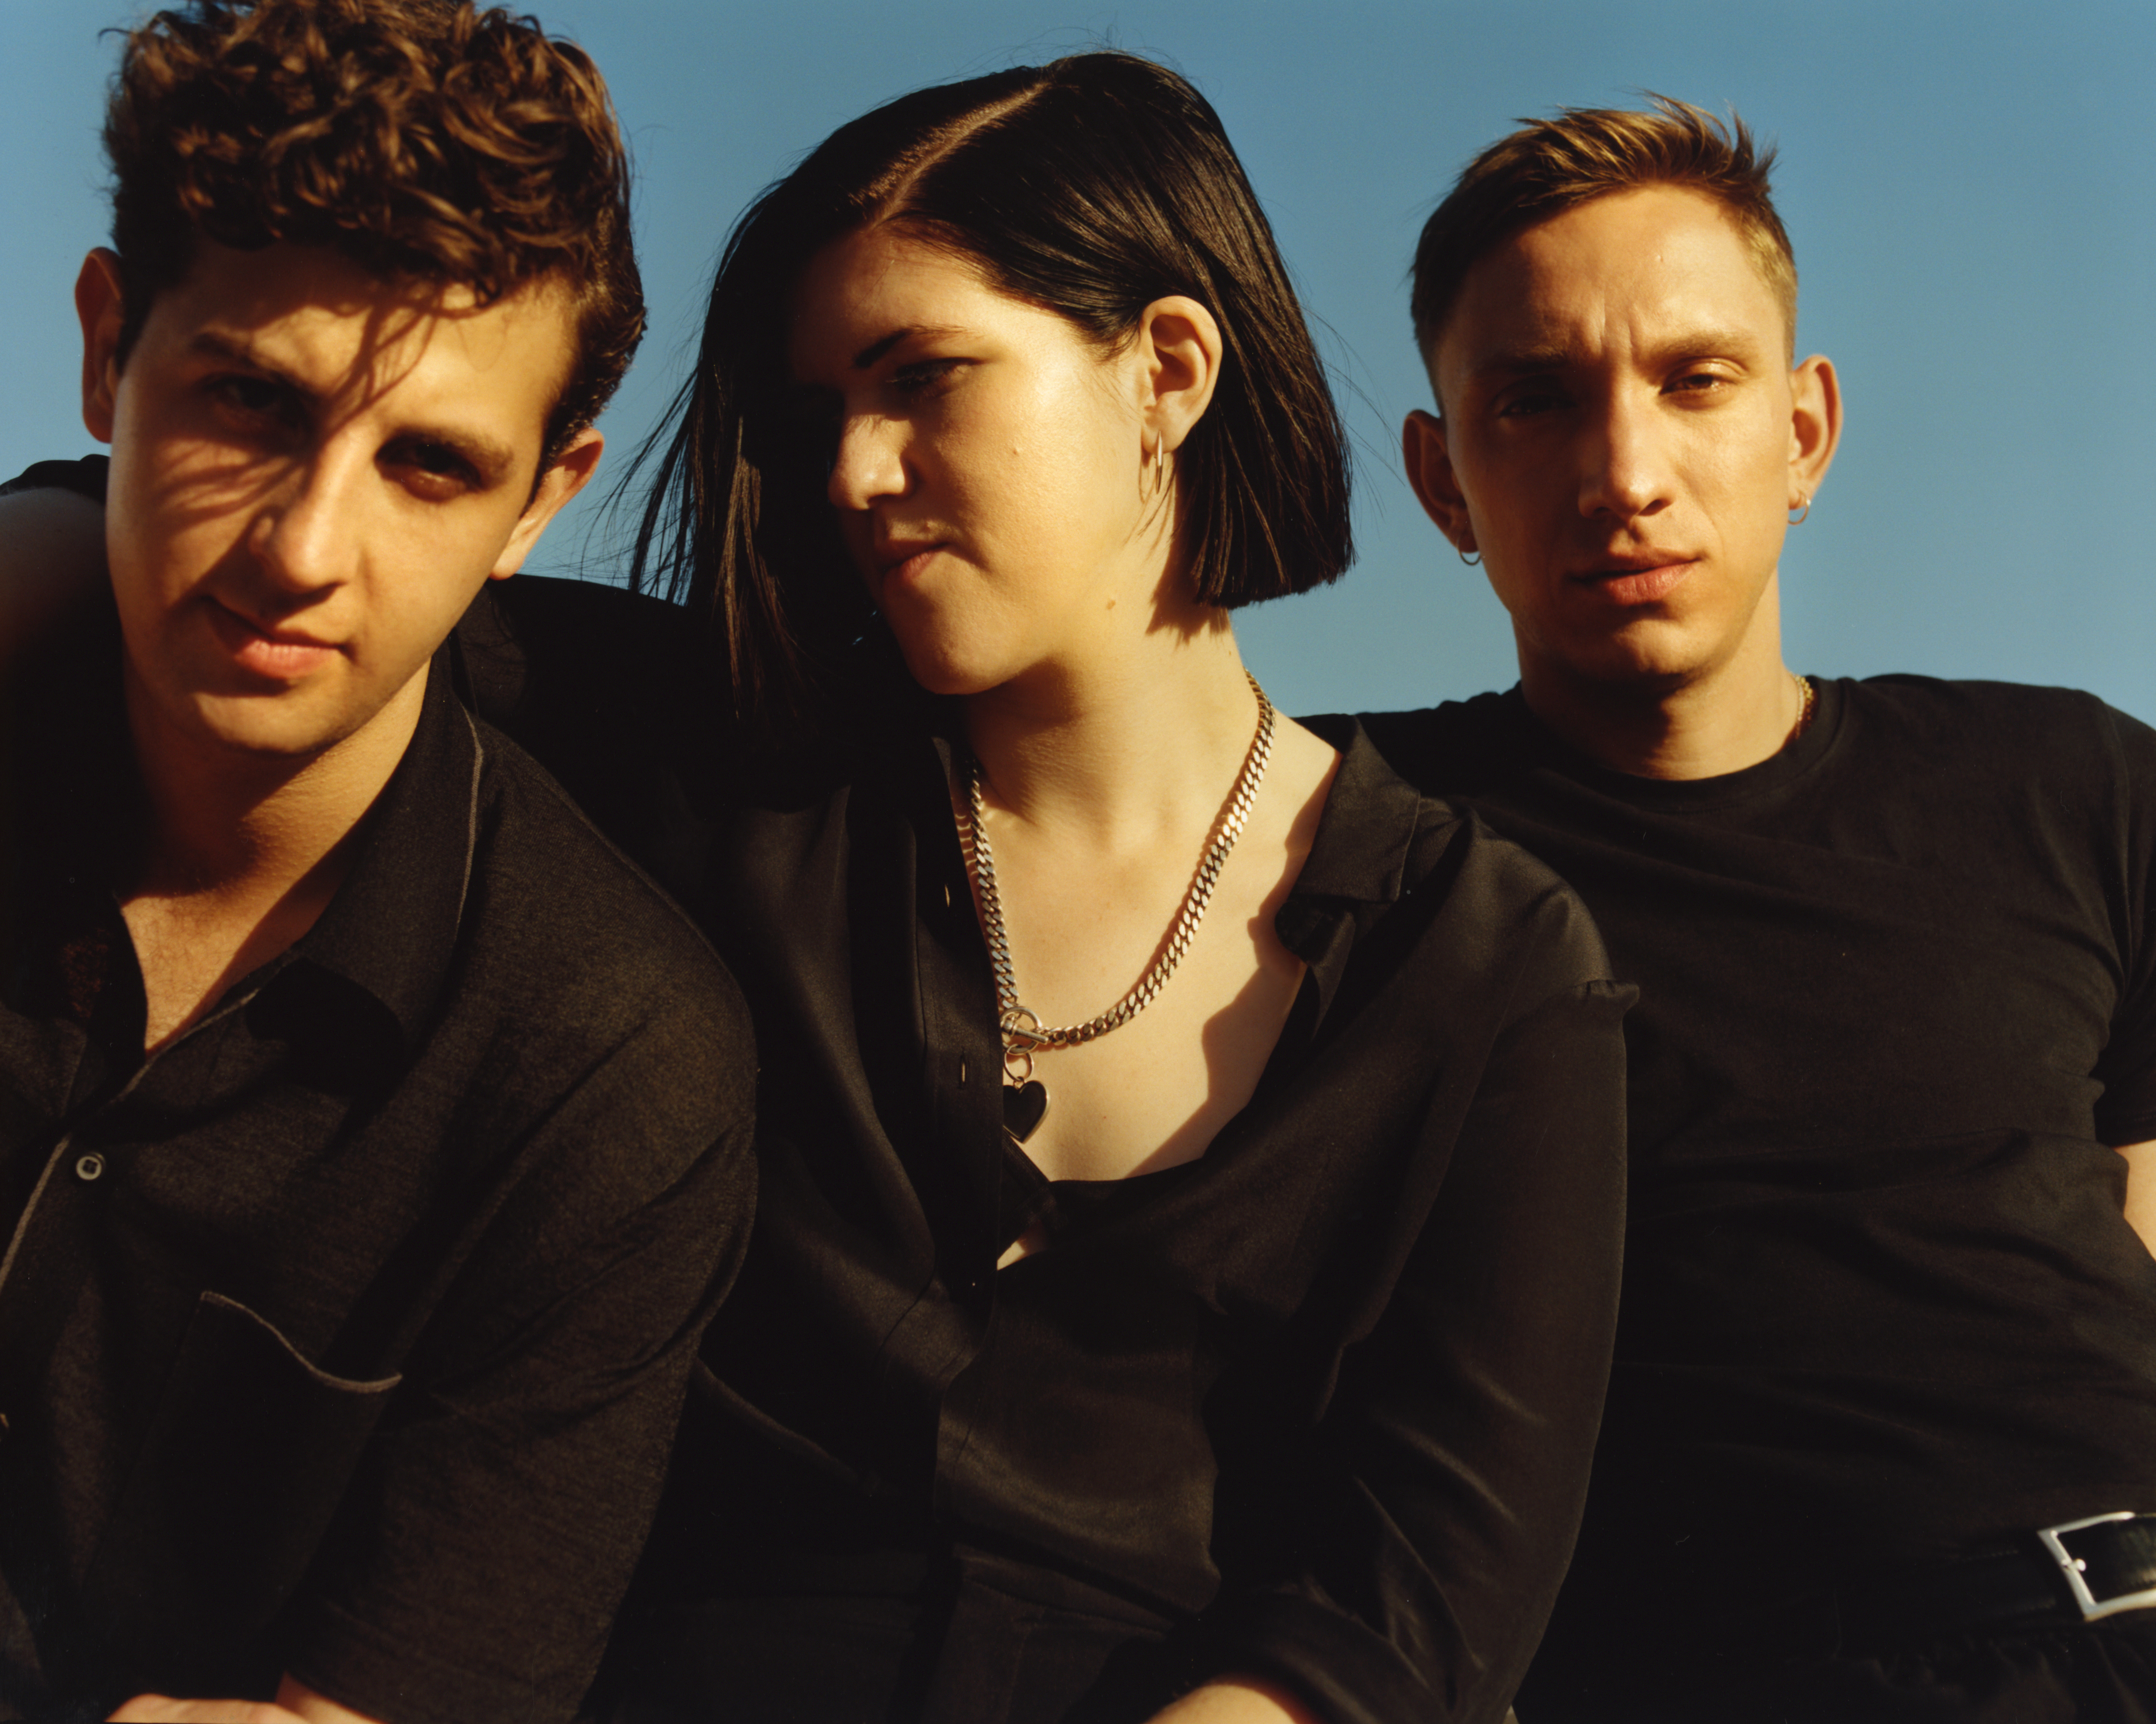 The xx announce new album 'I See You'. The full-length comes out on January 13th via Young Turks.